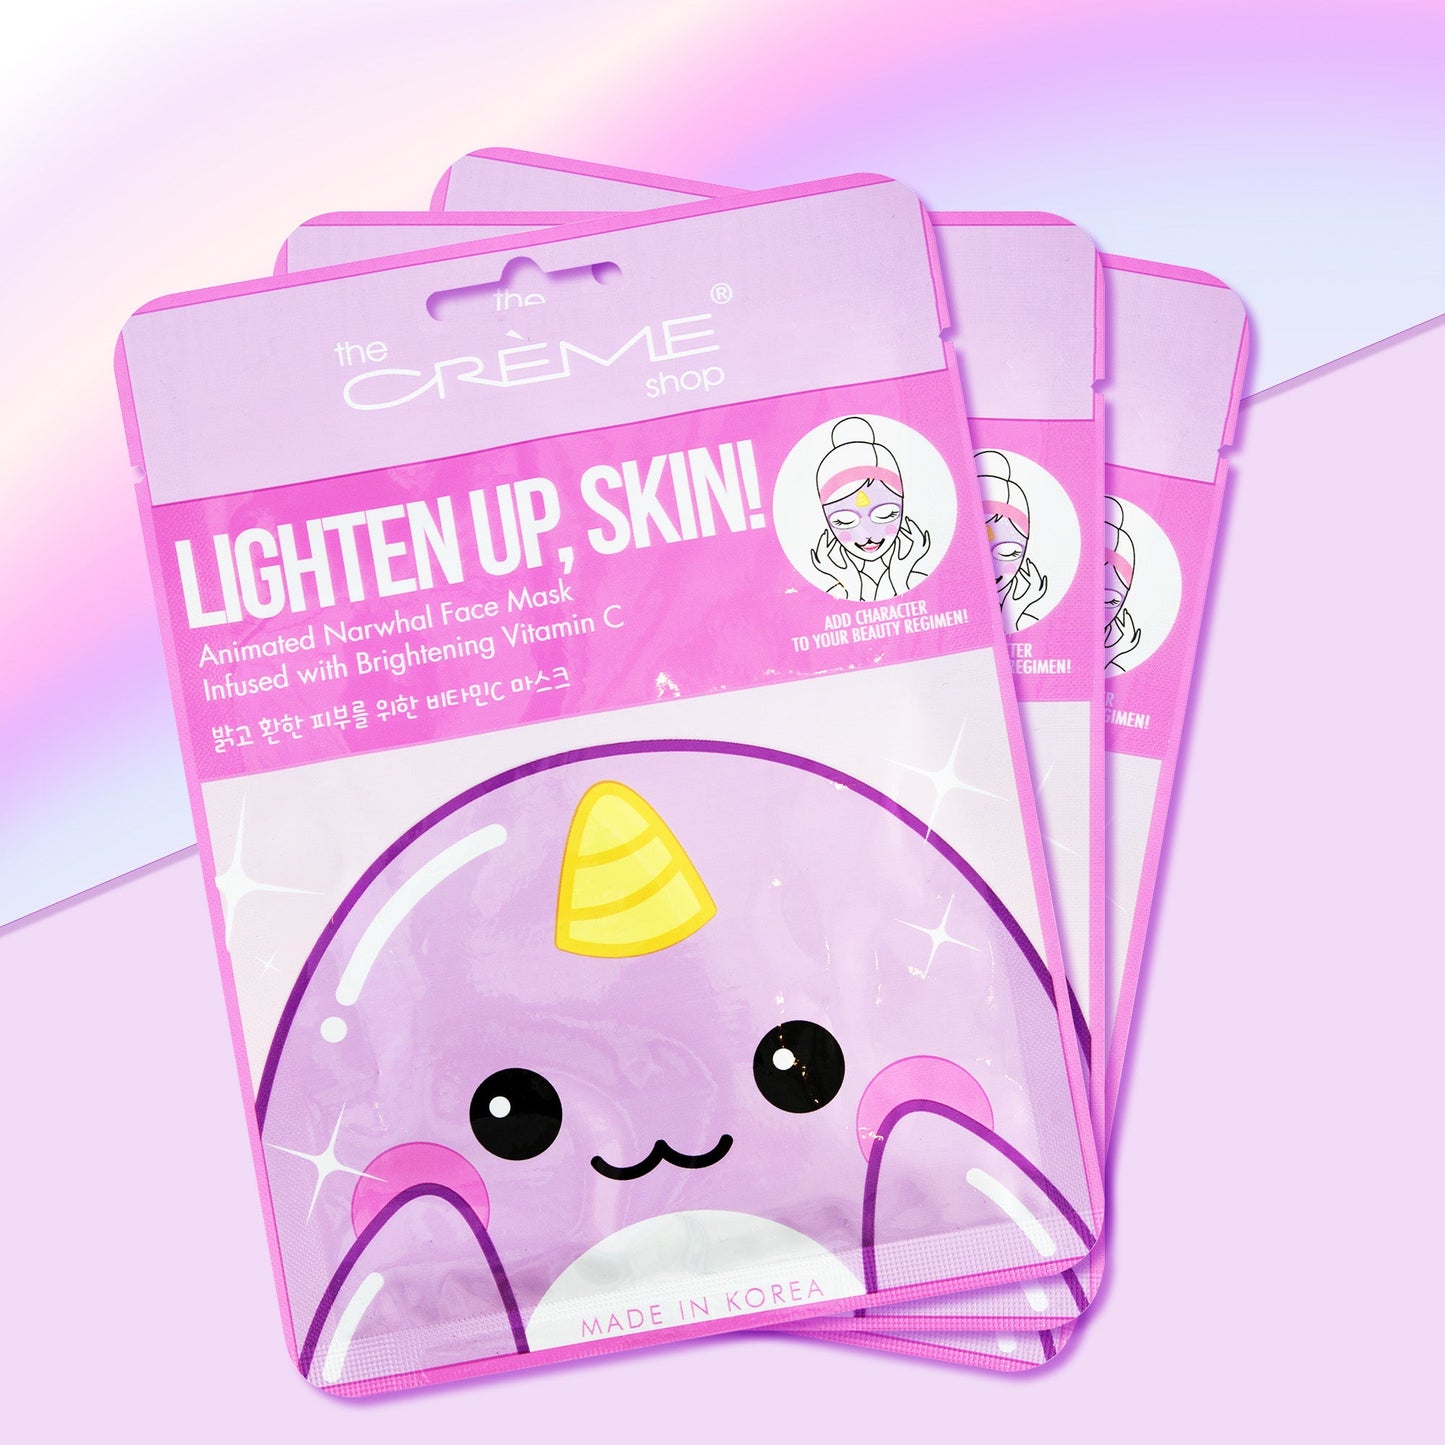 Lighten Up, Skin! Animated Narwhal Face Mask - Brightening Vitamin C Animated Sheet Masks - The Crème Shop 